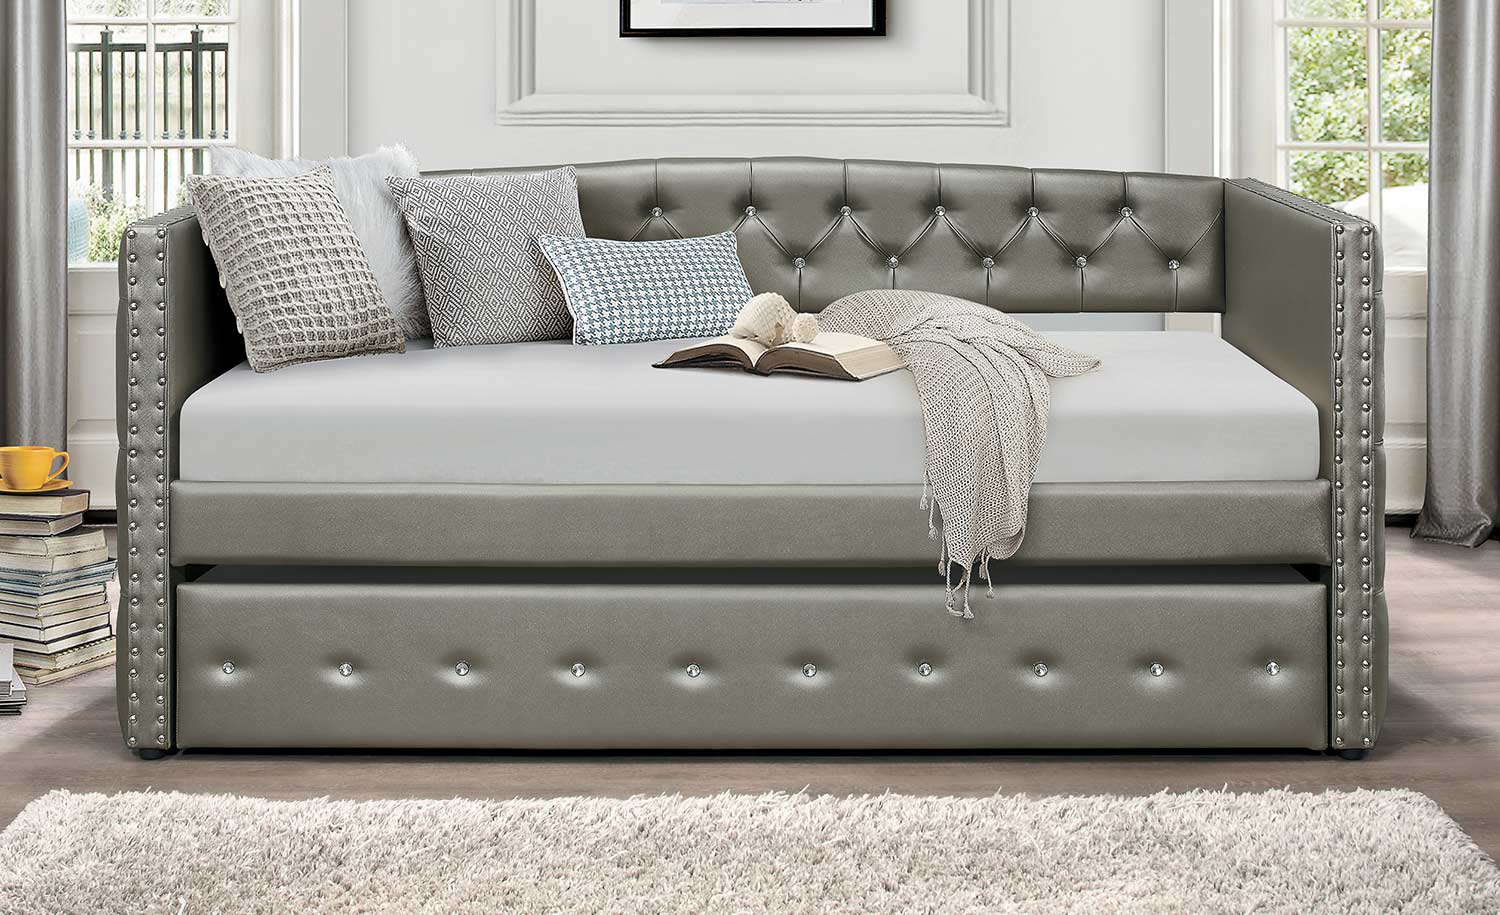 Homelegance Trill Daybed with Trundle - Silver Vinyl